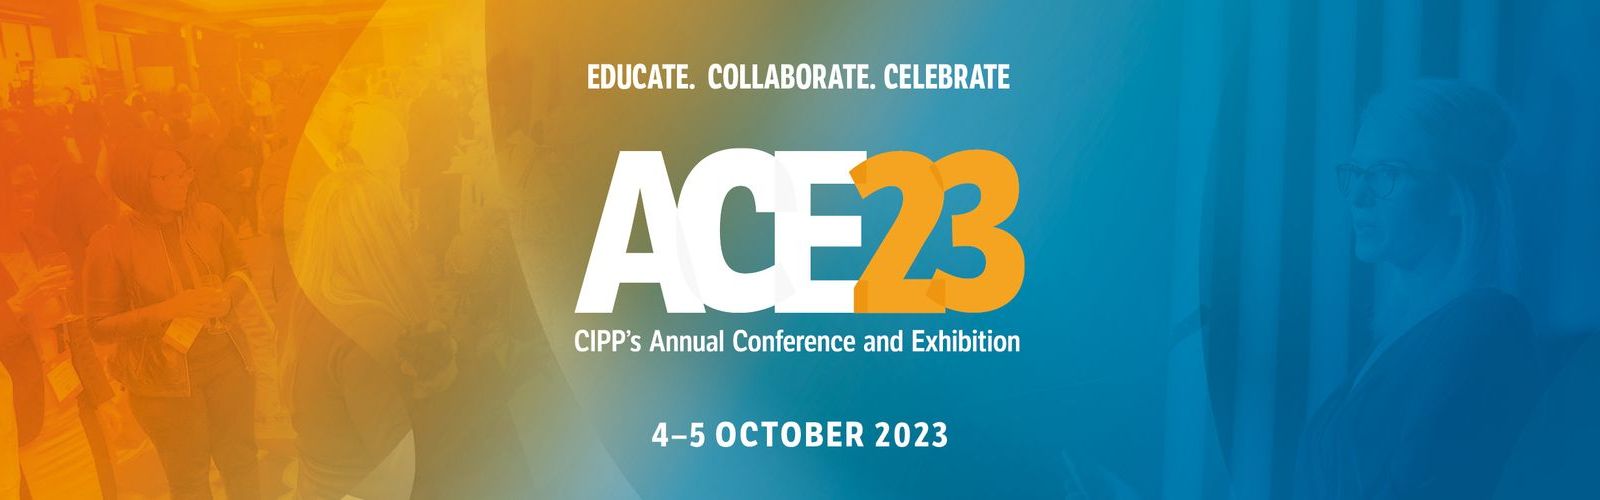 Secure your spot at our Annual Conference and Exhibition 2023 CIPP